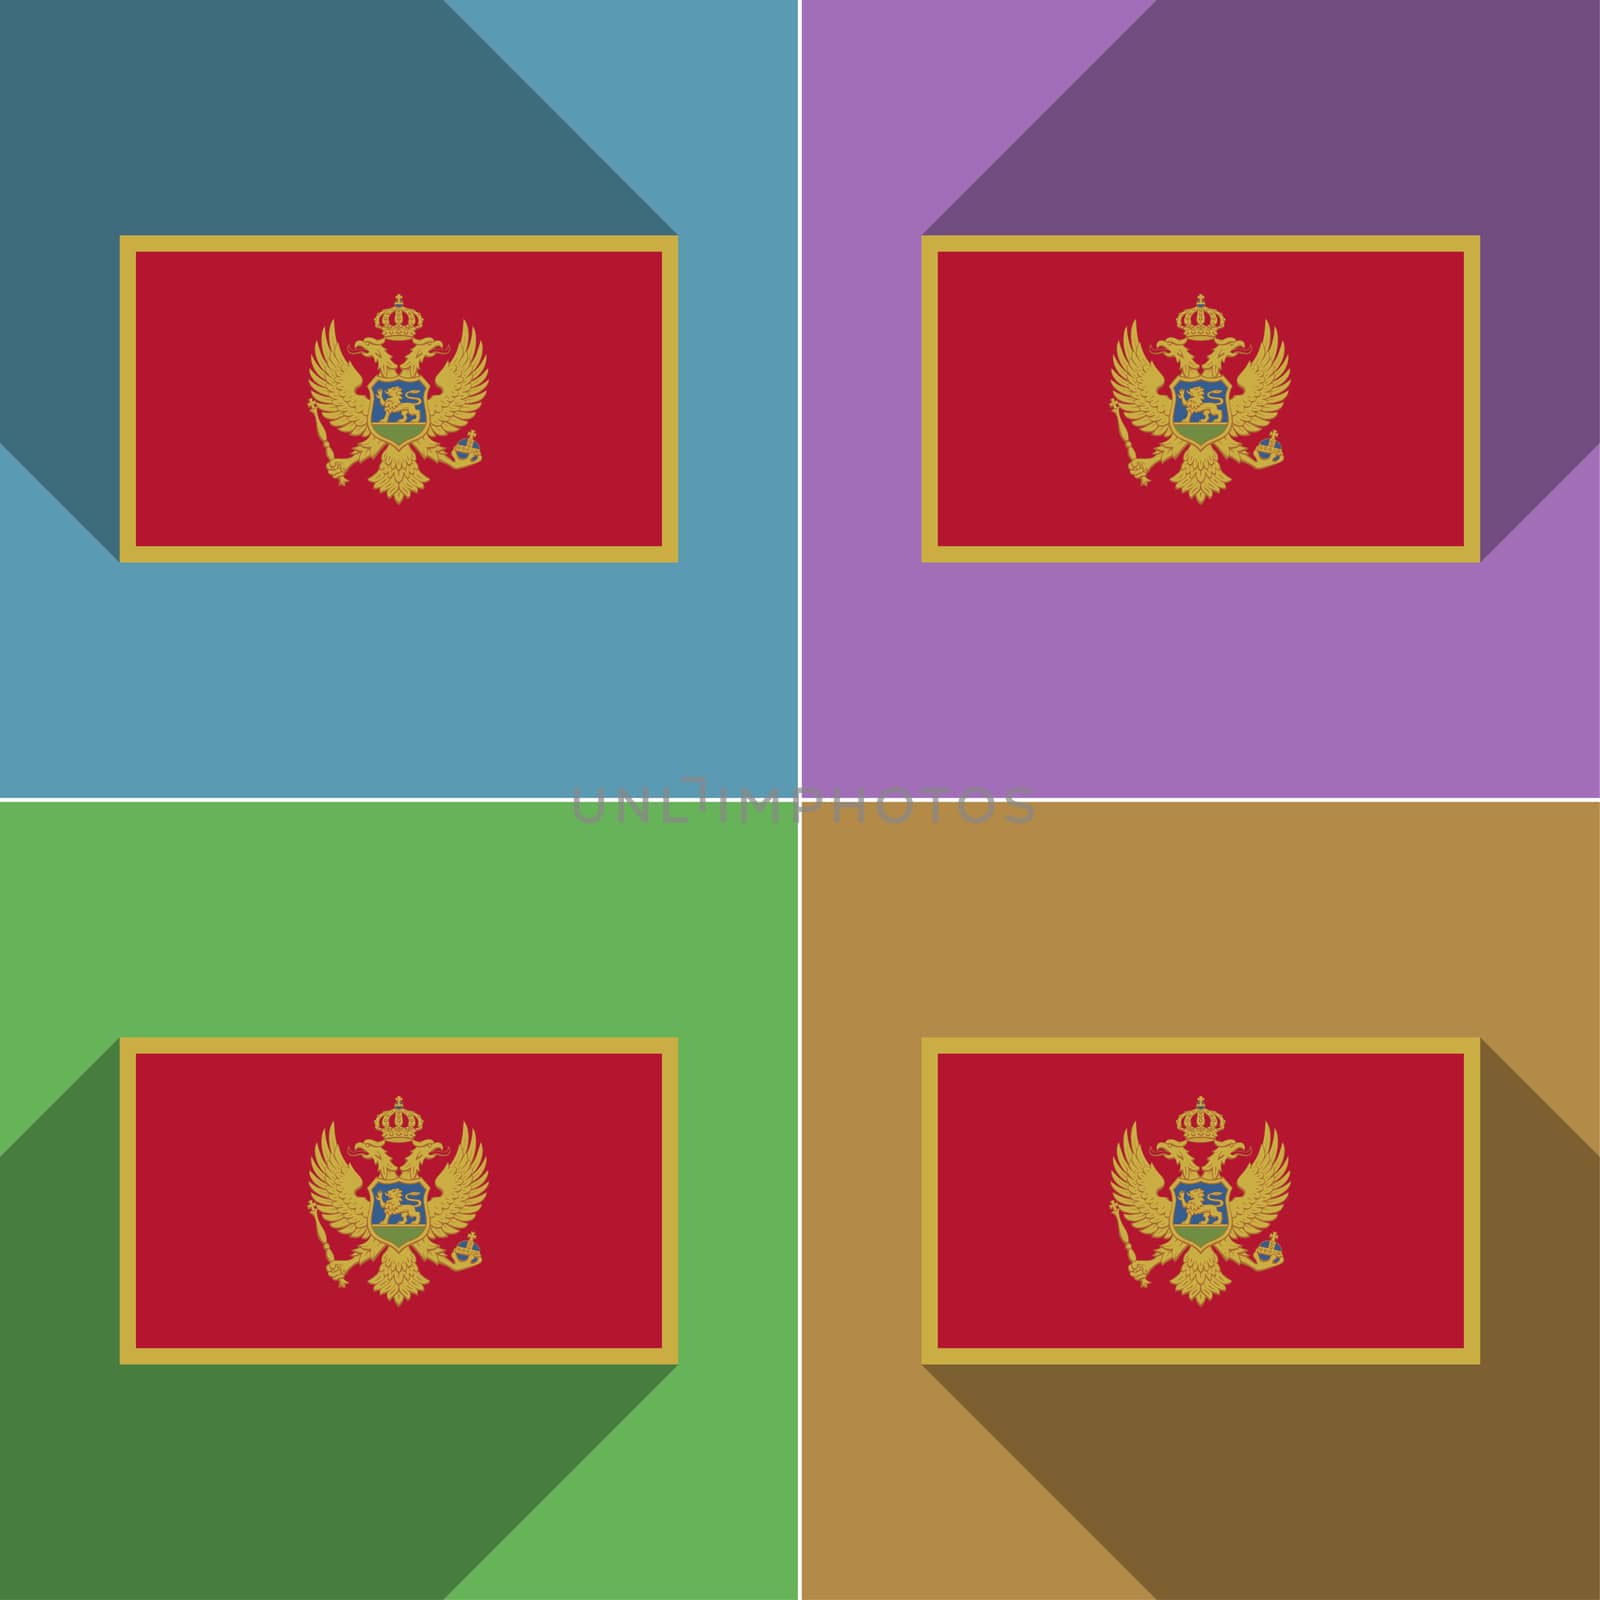 Flags of Montenegro. Set of colors flat design and long shadows.  illustration